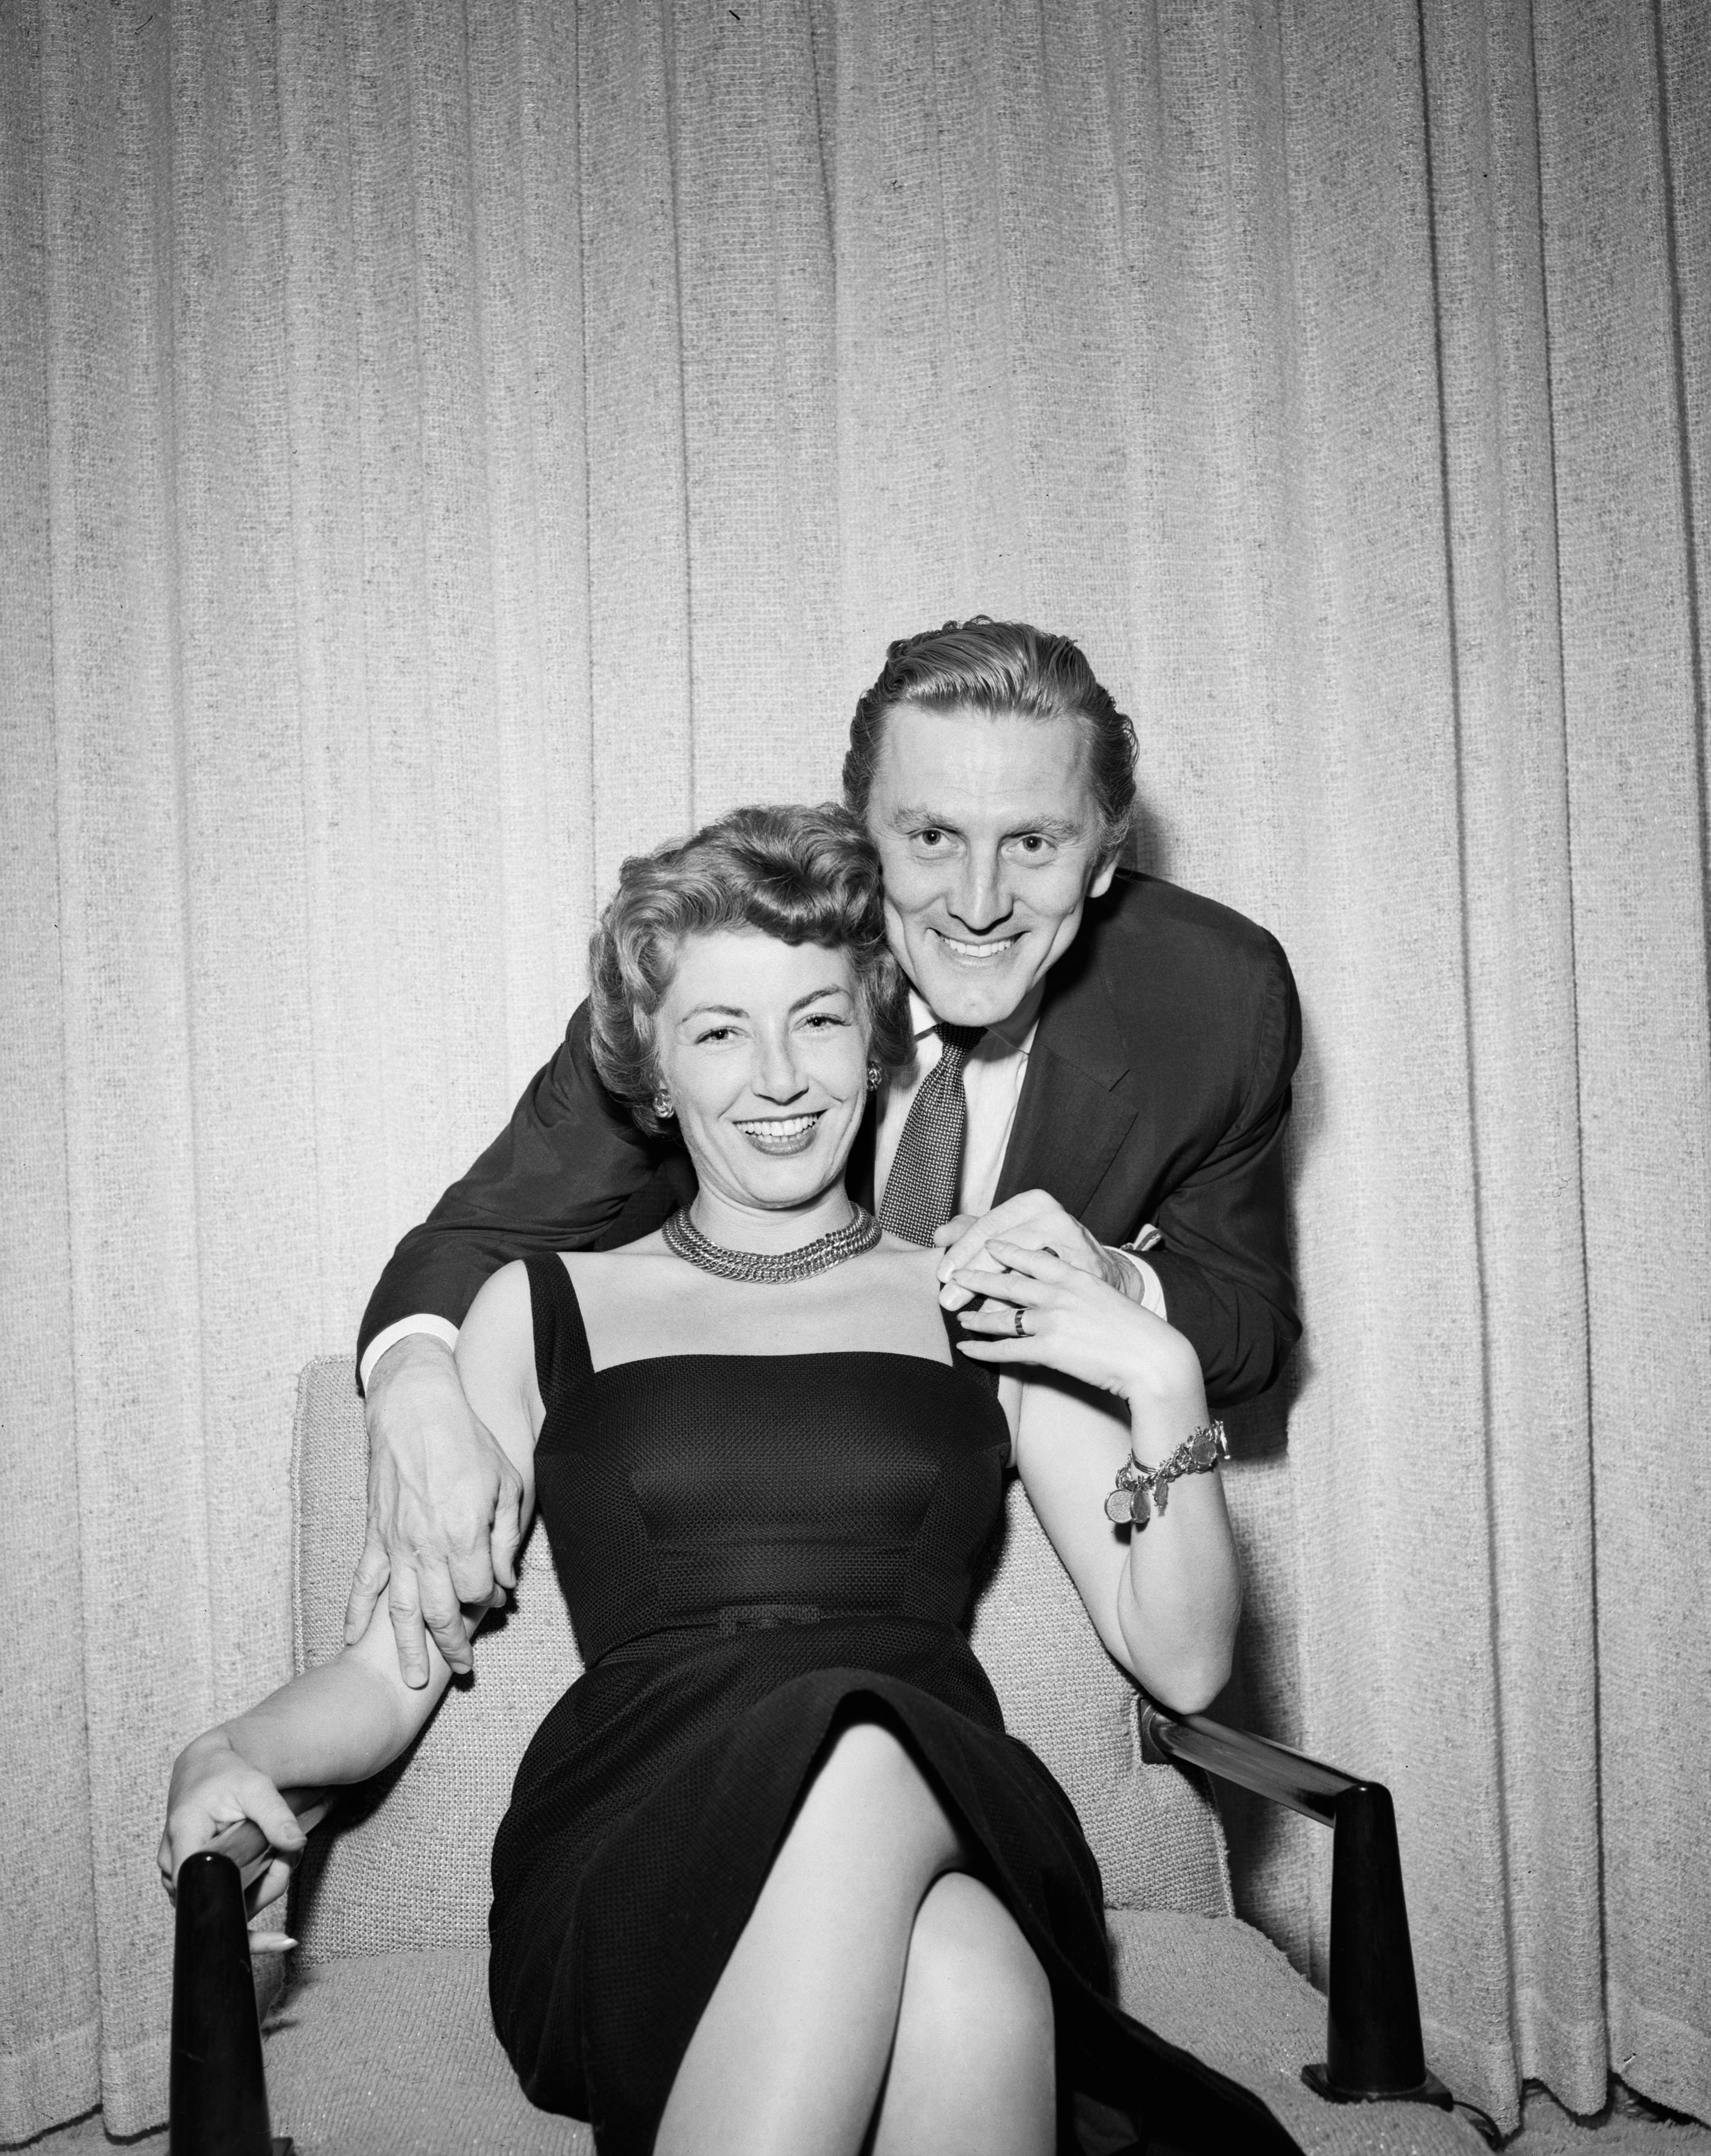 Kirk Douglas and Anne Buydens in Las Vegas 1954. | Source: Getty Images